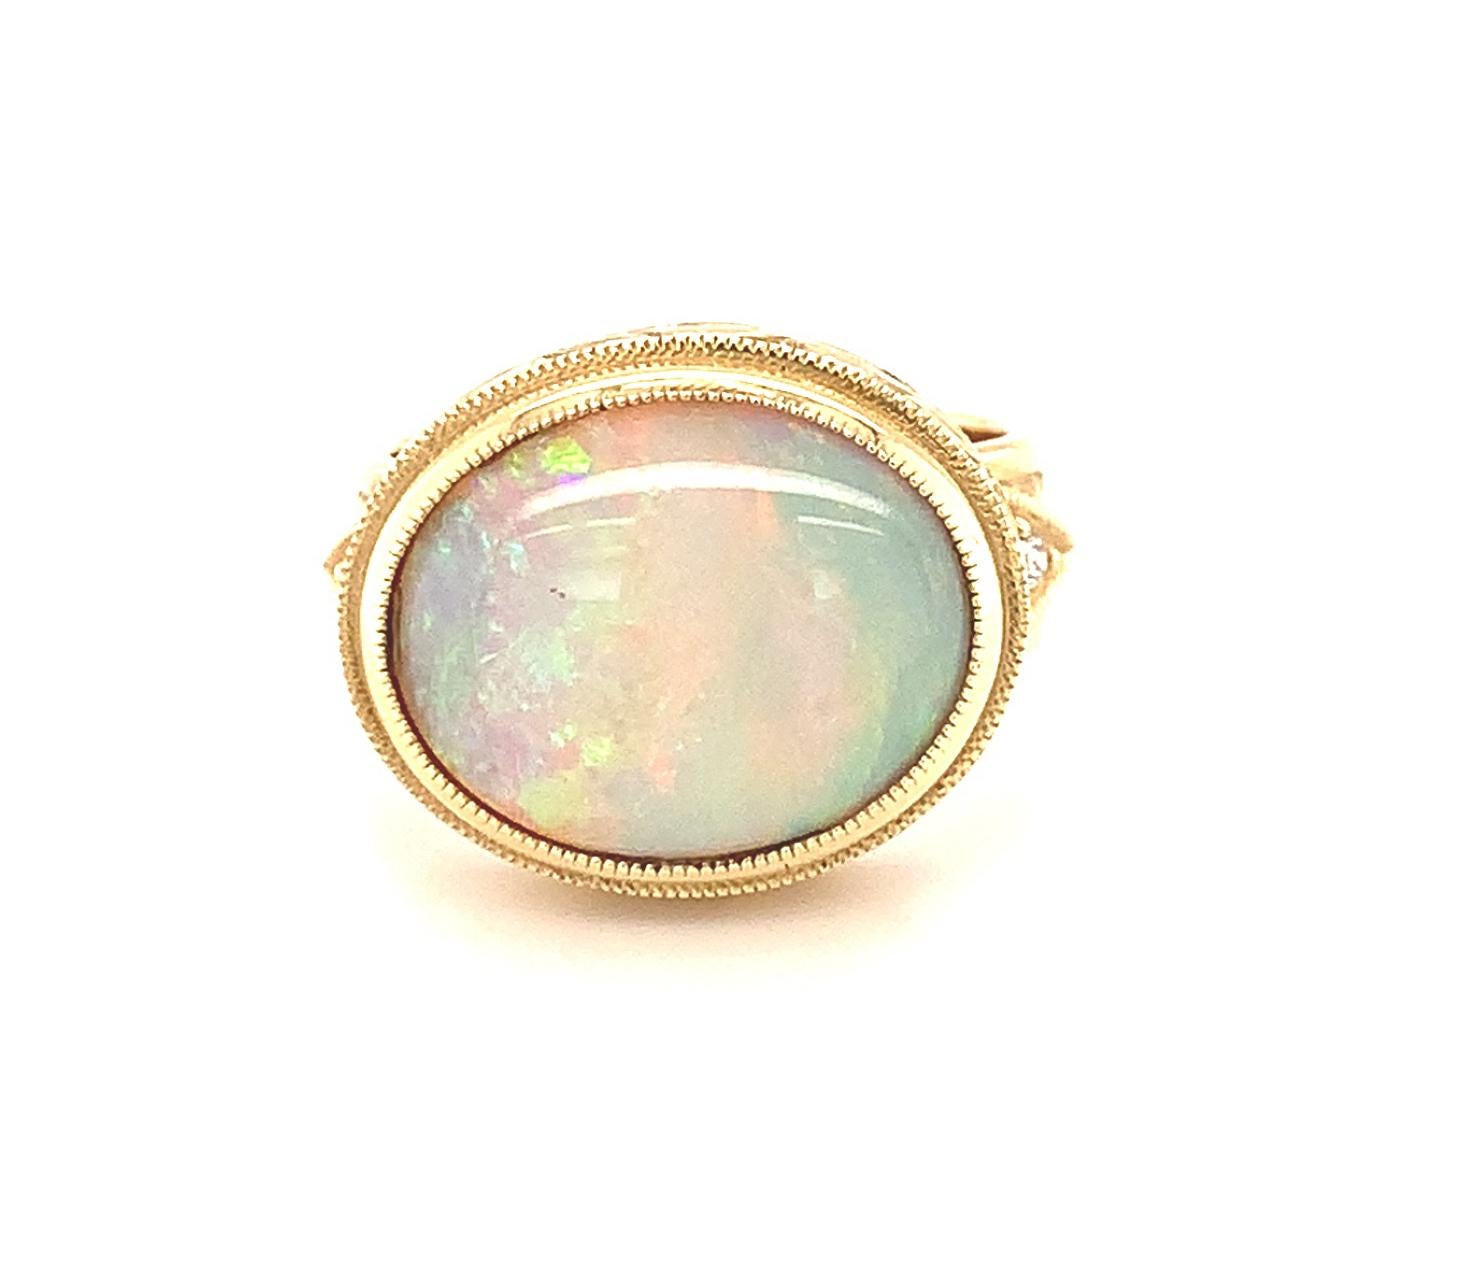 This beautiful 18k yellow gold handmade ring features a gorgeous Australian opal with stunning play-of-color.  Exhibiting all the colors of the rainbow in bright flashes throughout the entire gem, this opal ring will complement any outfit! The ring